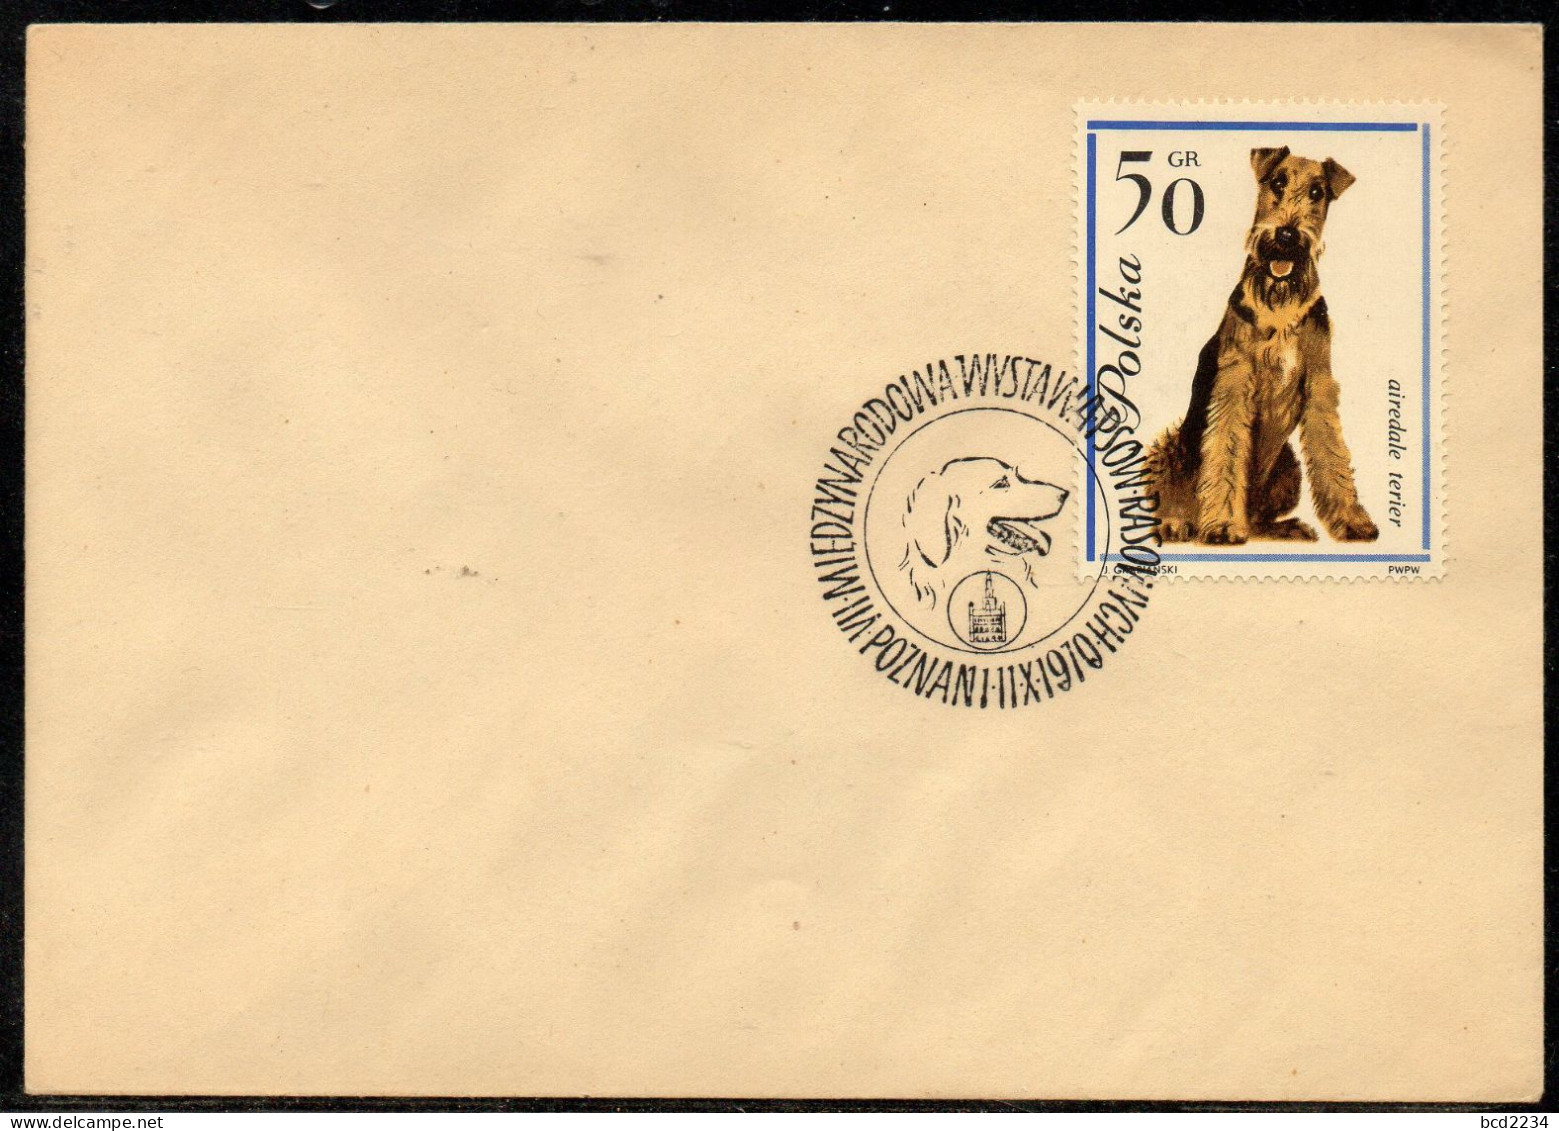 POLAND 1970 VII INTERNATIONAL PEDIGREE DOG SHOW IN POZNAN SPECIAL CANCEL ON COVER POLISH DOGS - Chiens